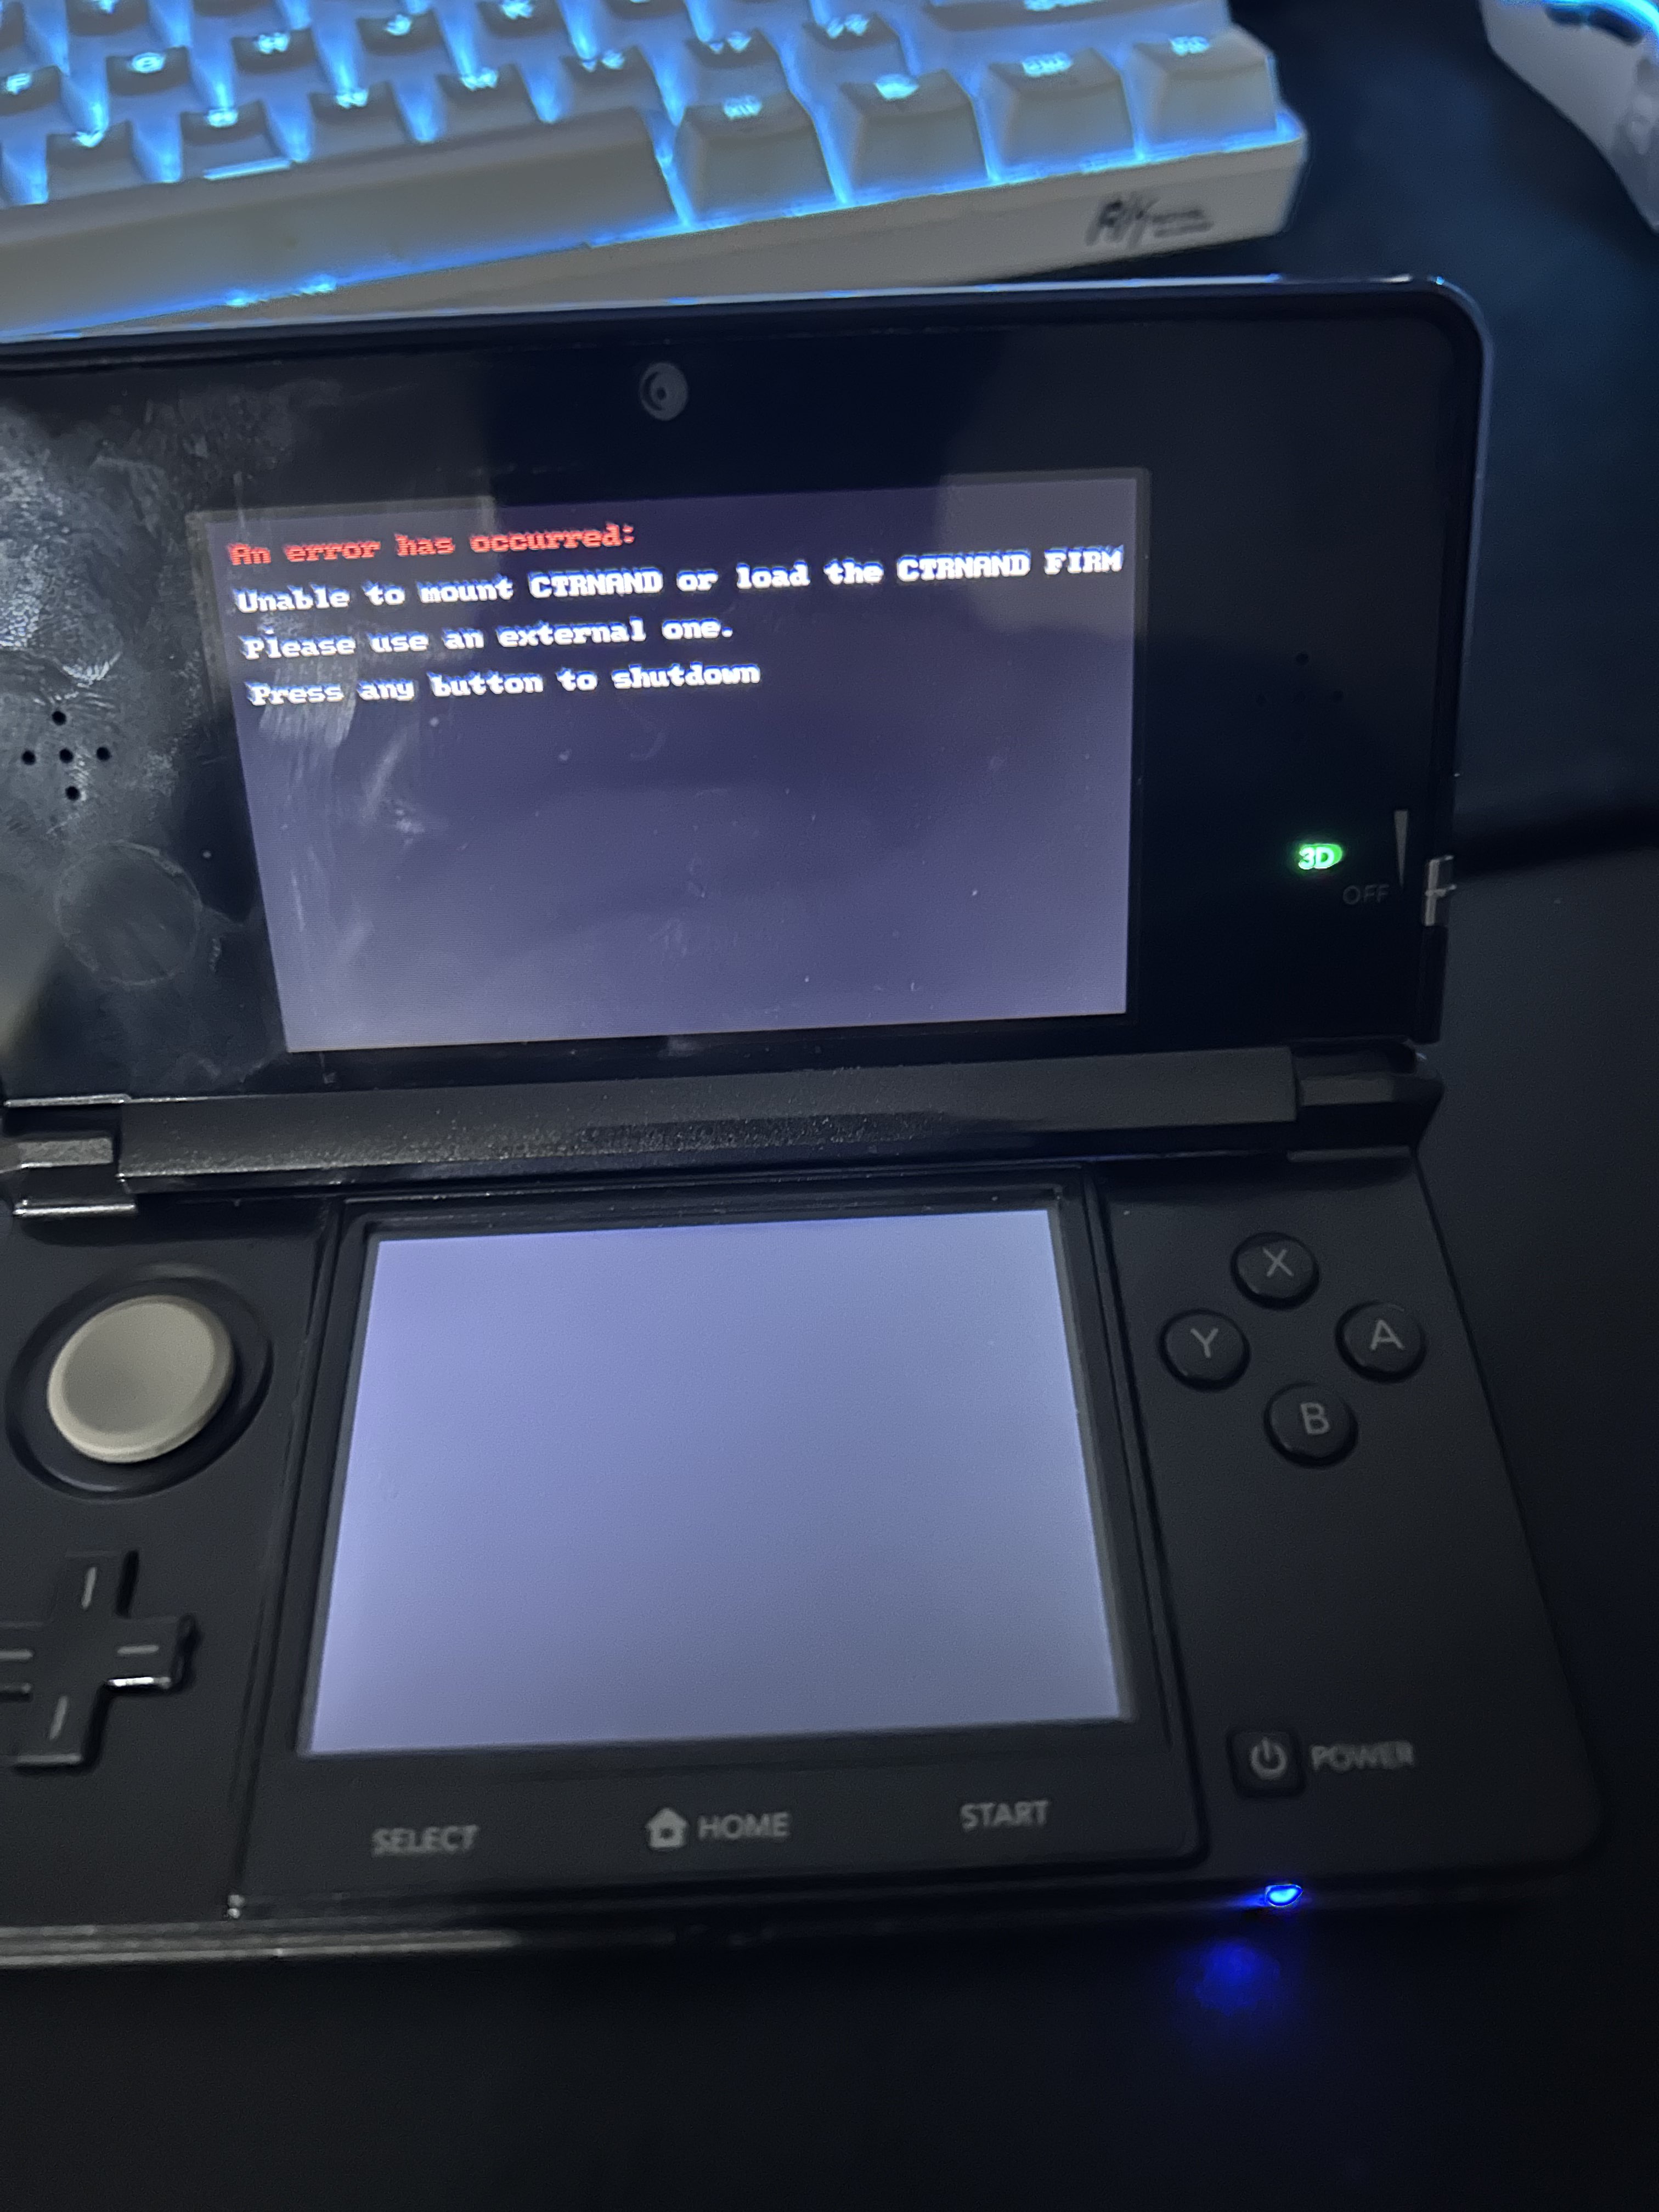 Modded o3DS (region changed) gives "Unable to mount CTRNAND" error when into any mode. | GBAtemp.net The Independent Video Game Community